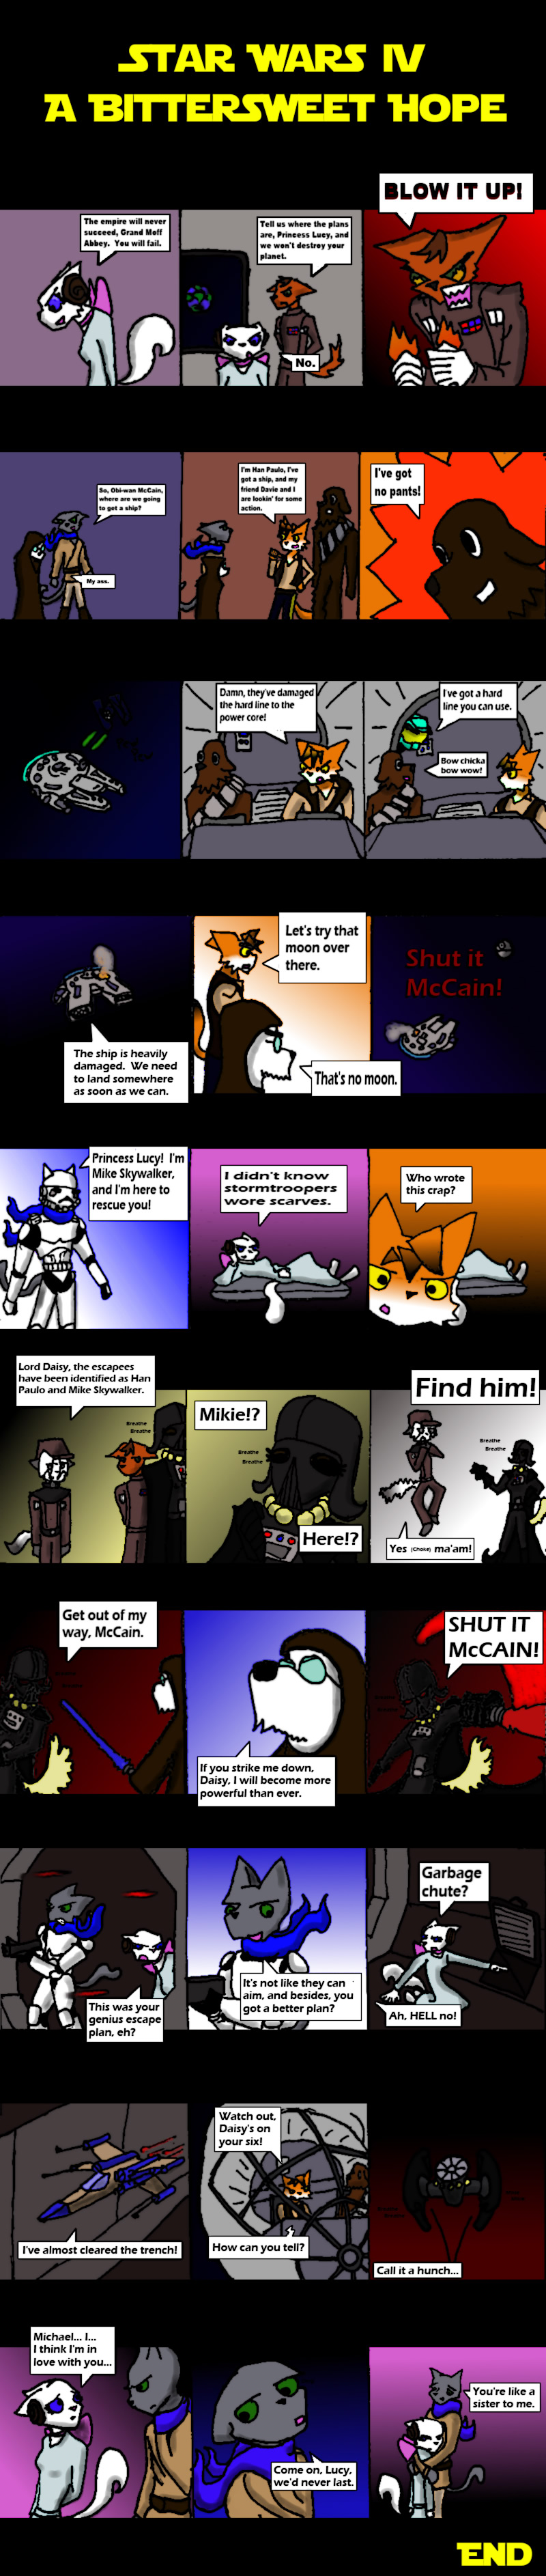 Candybooru image #3729, tagged with Abbey Augustus Comedy_(Artist) Daisy David Lucy McCain Mike Paulo guest_comic parody